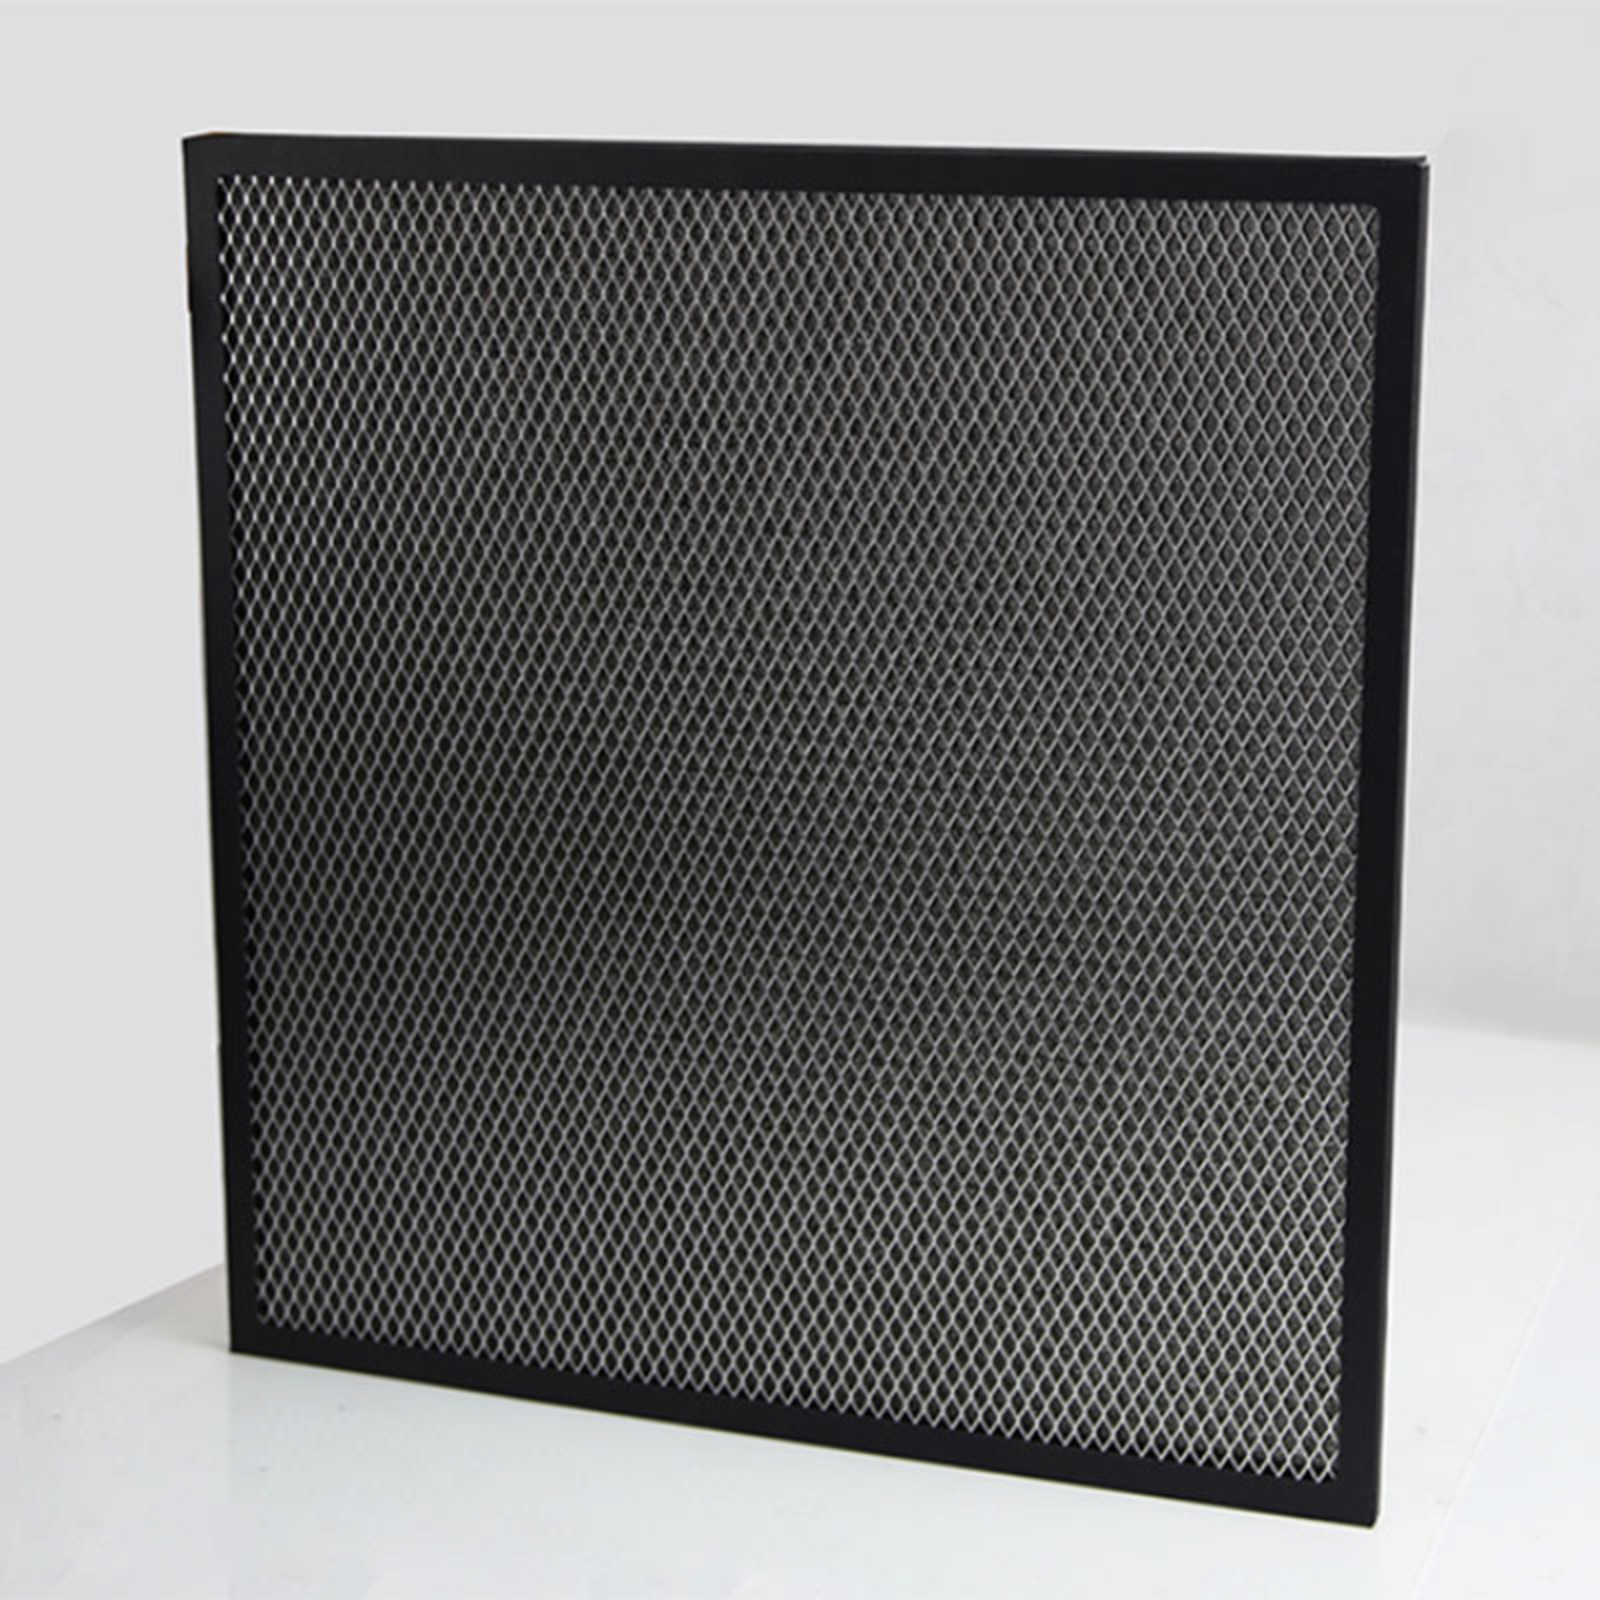 MELIUS spare filter for MellonAir 200 air cleaner